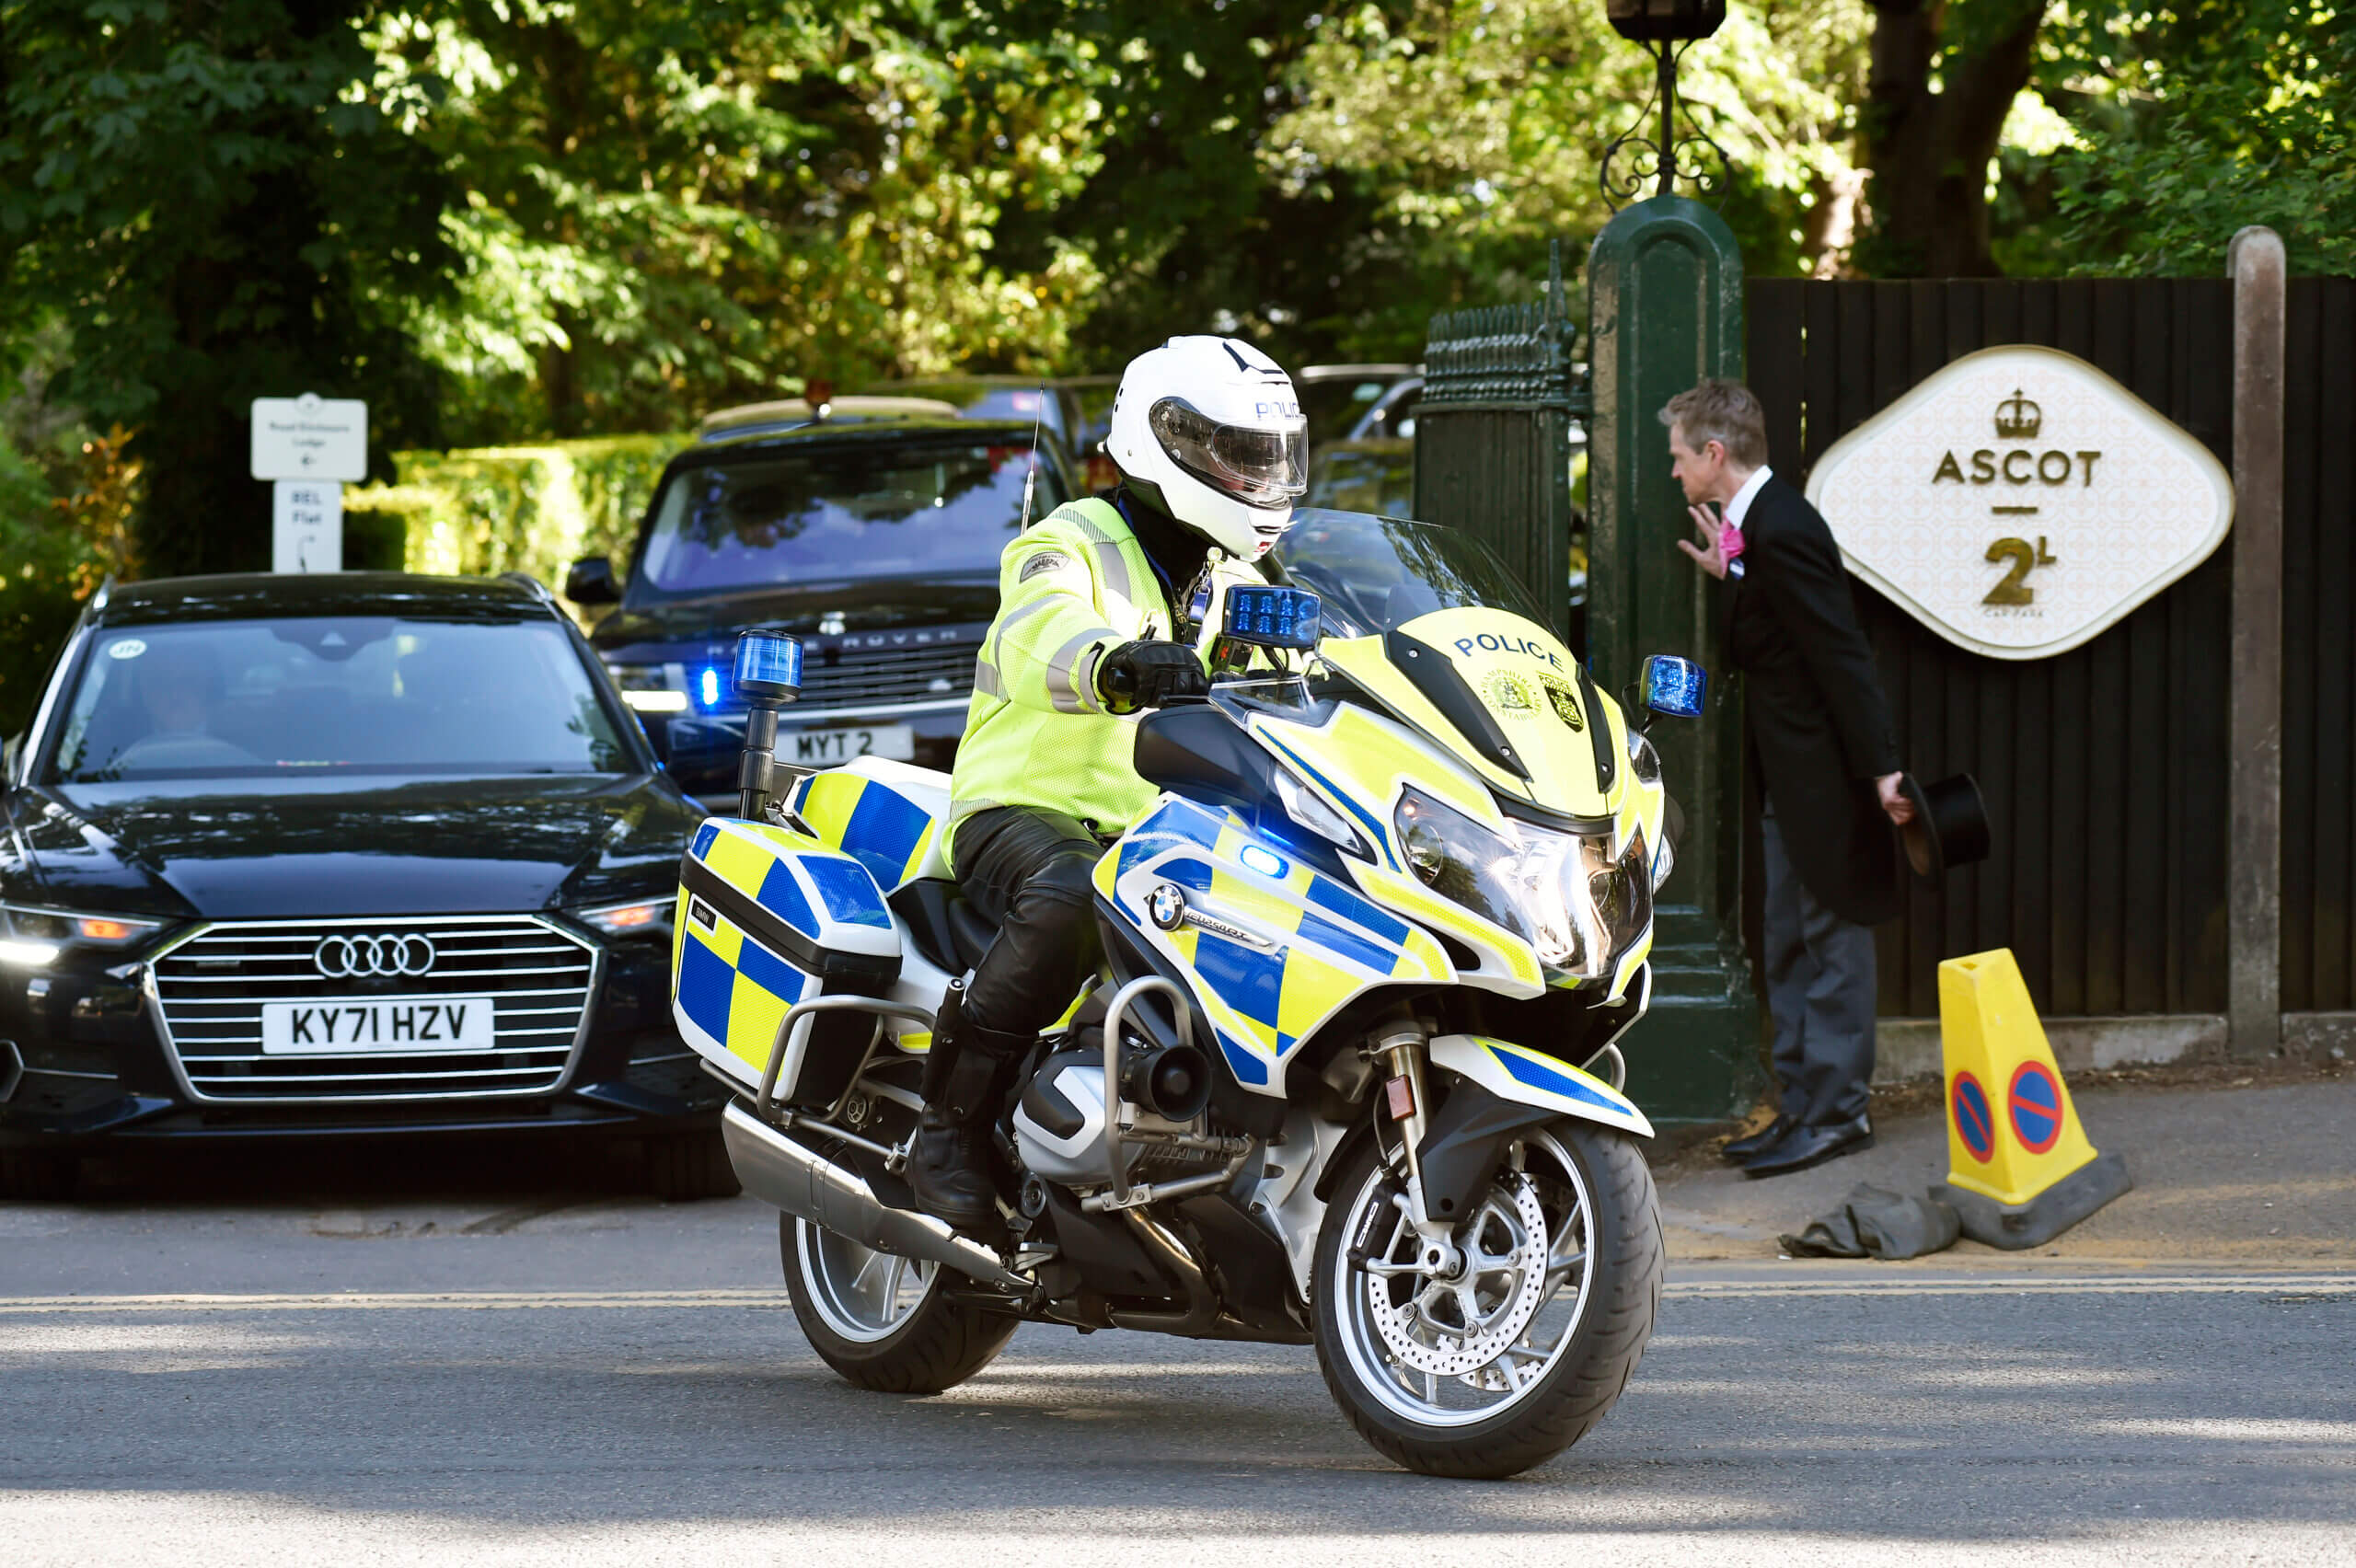 Police motorbike exiting Ascot